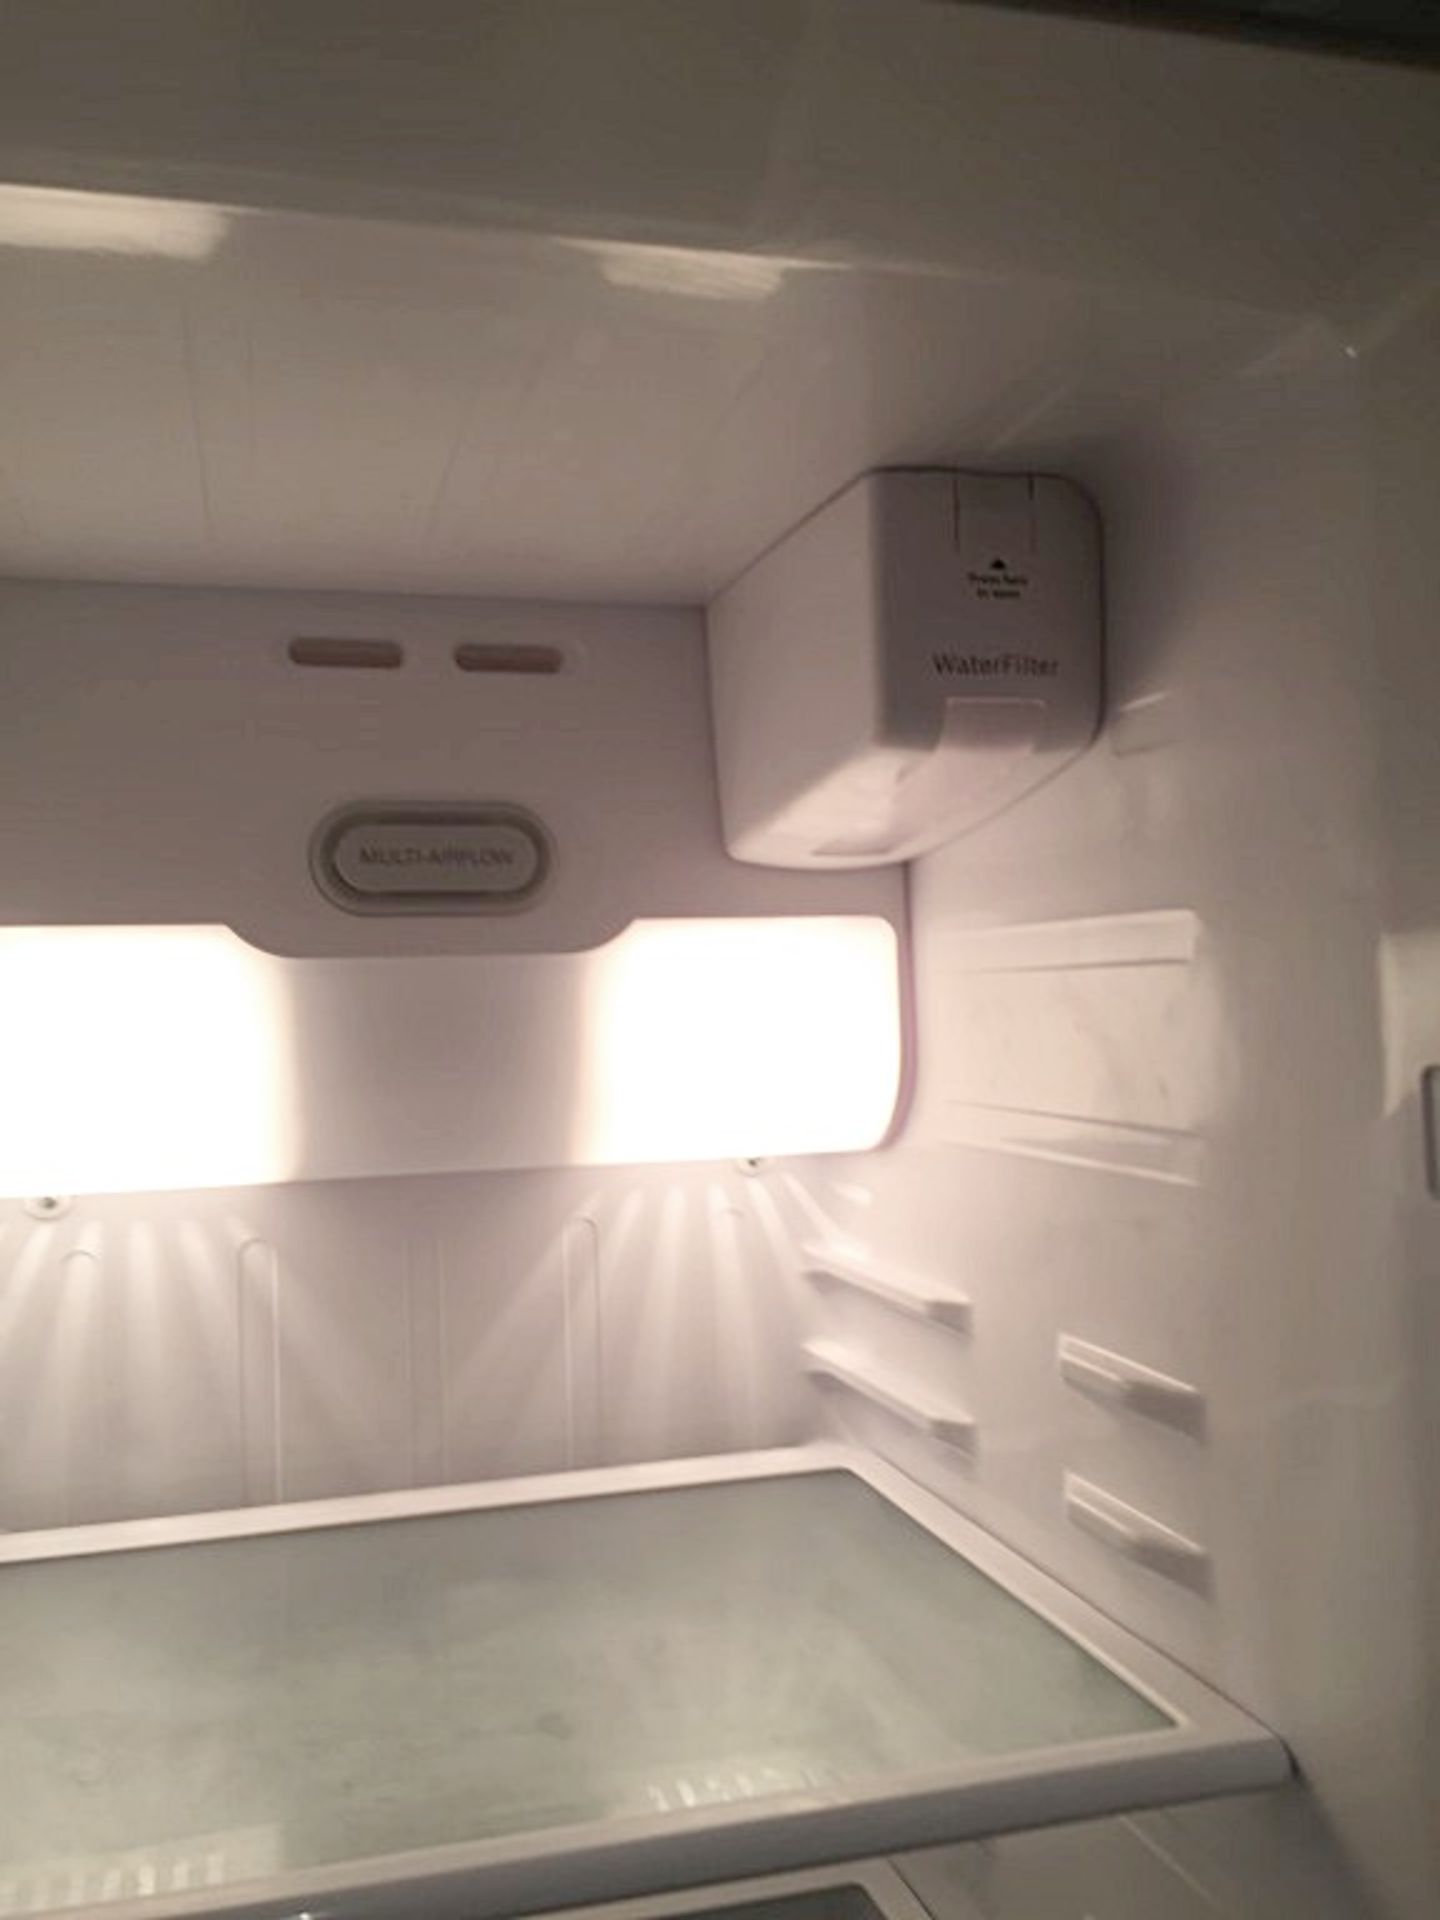 1 x Siemens American Fridge / Freezer - Approx 3-4yrs Old In Excellent Working Condition - CL211 - - Image 7 of 8